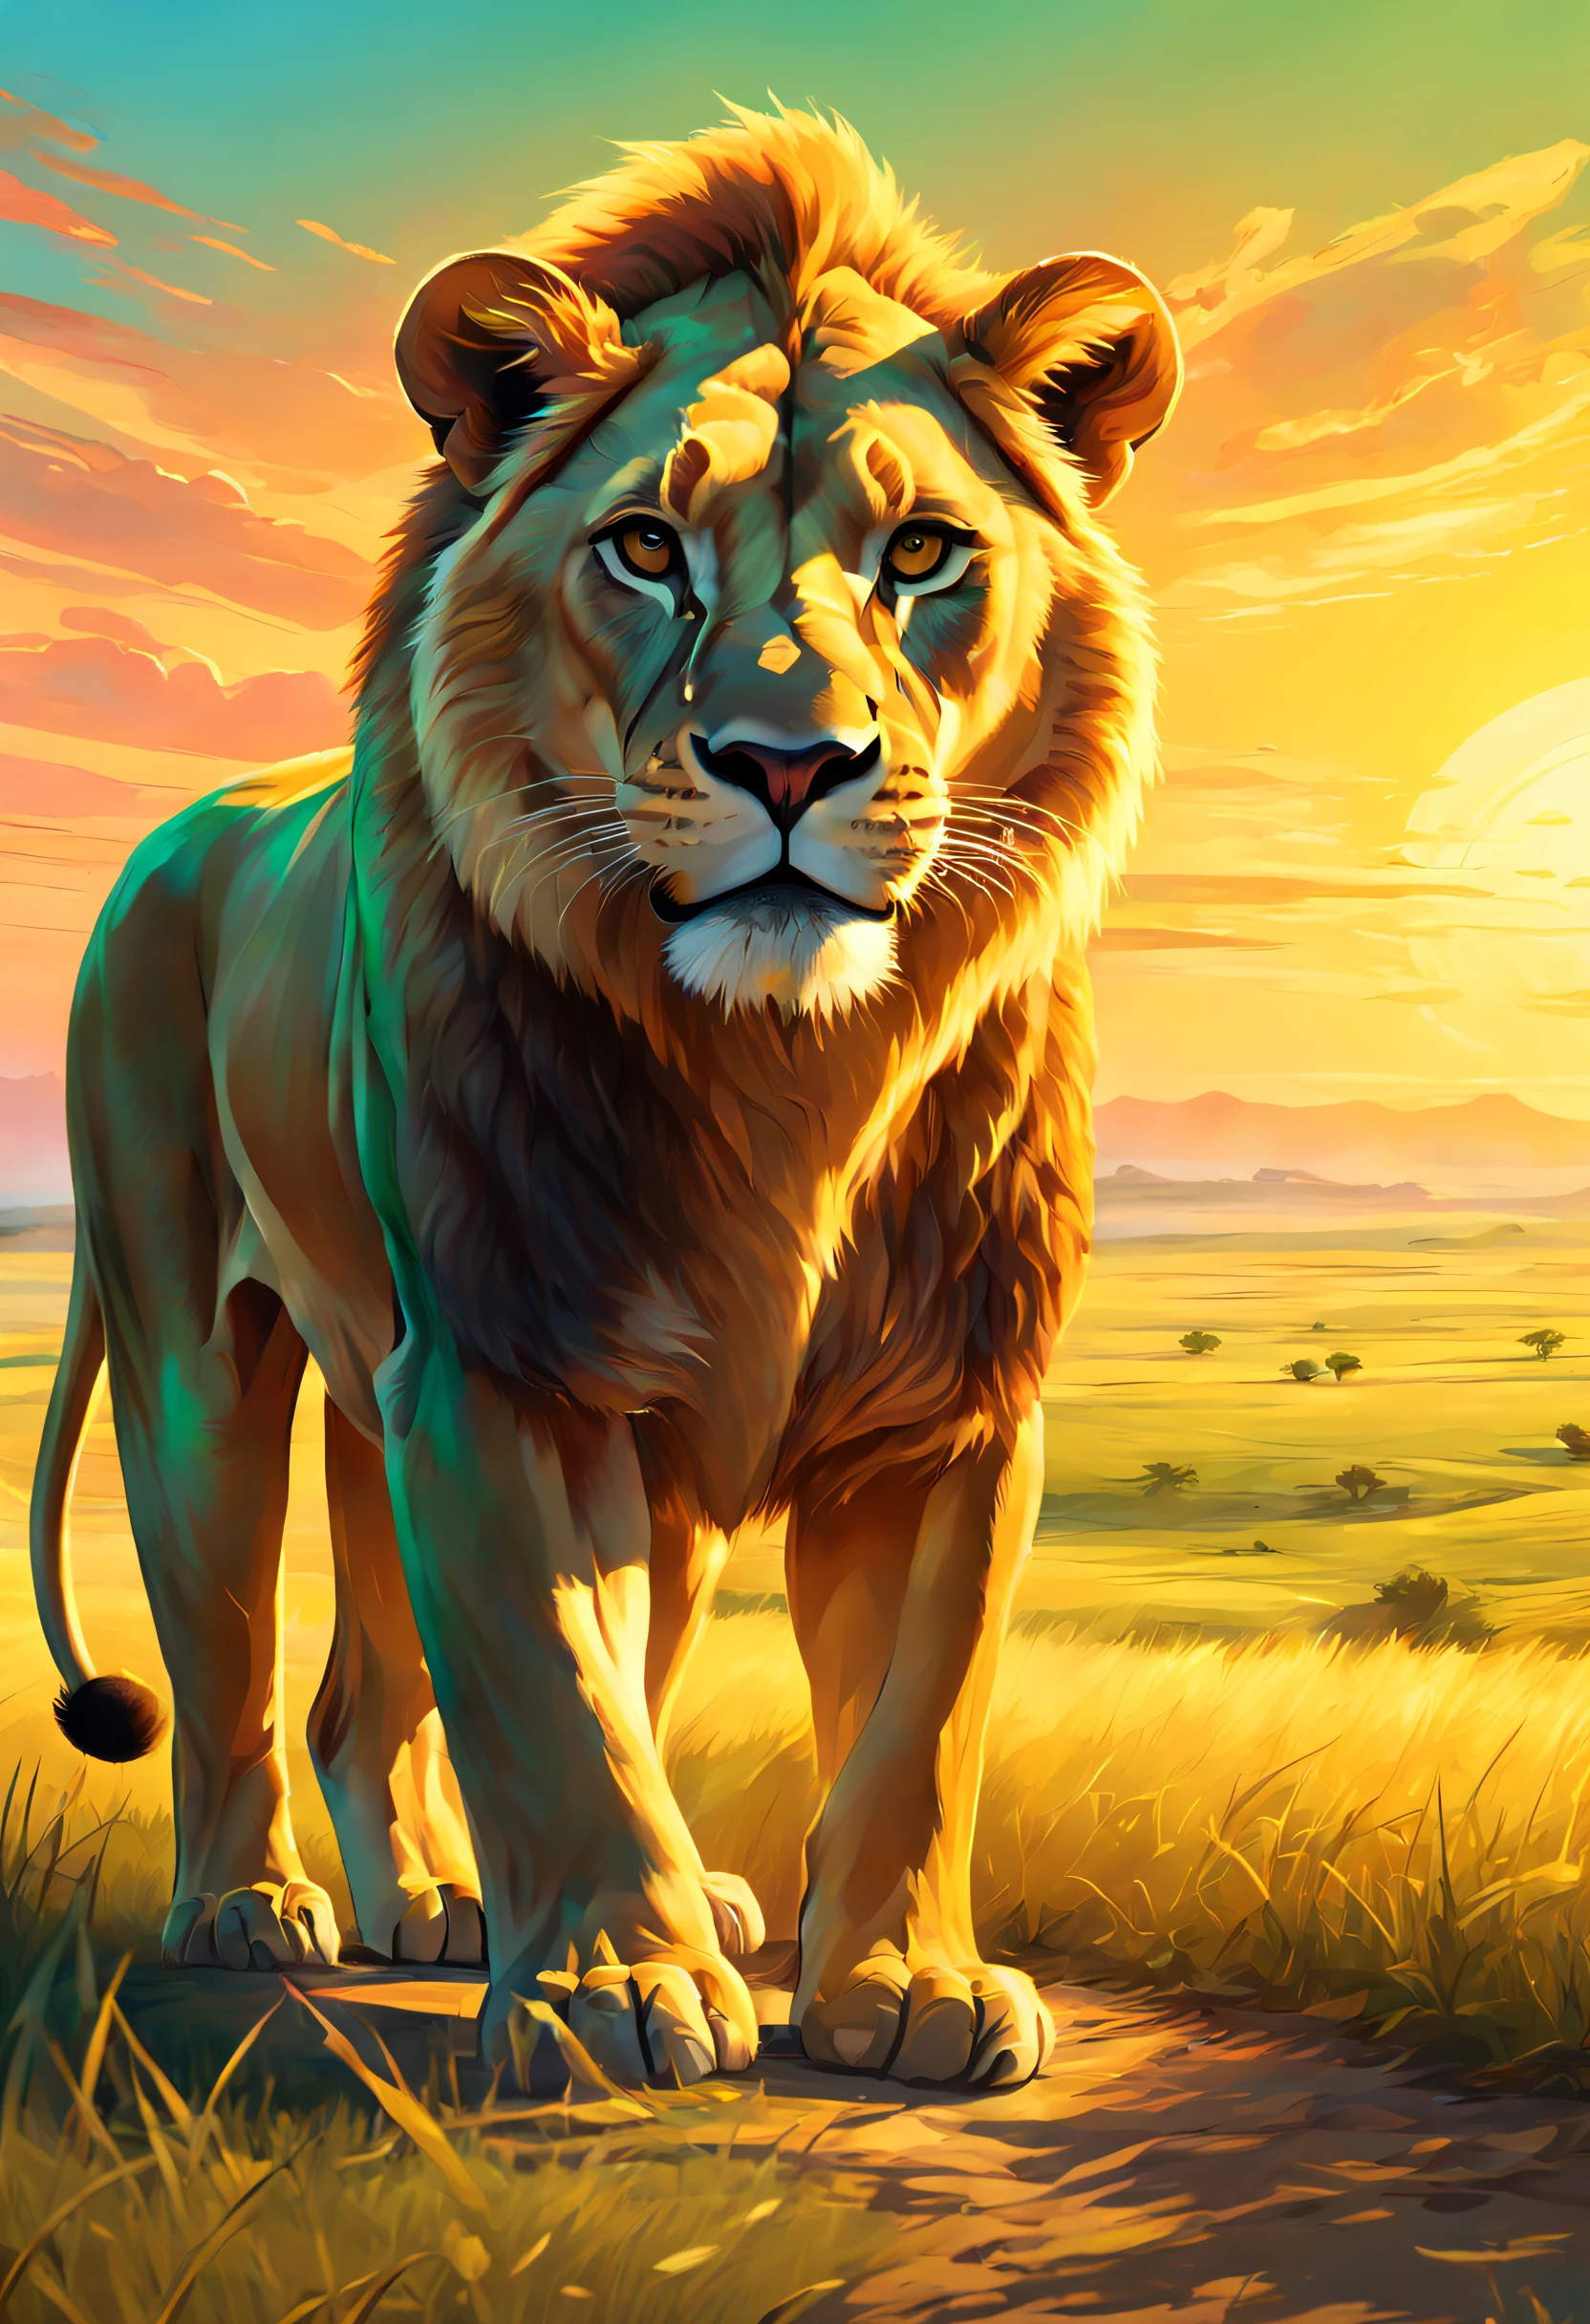 Dream illustration, fairytale-like, Oil painting, 8K，k hd, A large lioness roared, Background, Beautiful steppe plains, HD, Golden, Light yellow, Light blue-green, carmine, verde claro, sunrise colors, Golden glow atmosphere (Digital drawing:1.2), Comic style, ToonYou Style, Illustrative funk, Counterwave graffiti, Perspective view, Extreme Face Close-Up, tee shirt graphic, Ultra HD, Realistic, Vivid colors, Highly detailed, Ultra HD drawing, pen and ink, Perfectcomposition, beautiful detailed intricate insanely detailed octane render trending on artstation, 8K art photography, Arte conceptual fotorrealista, soft natural volumetric cinematic perfect light